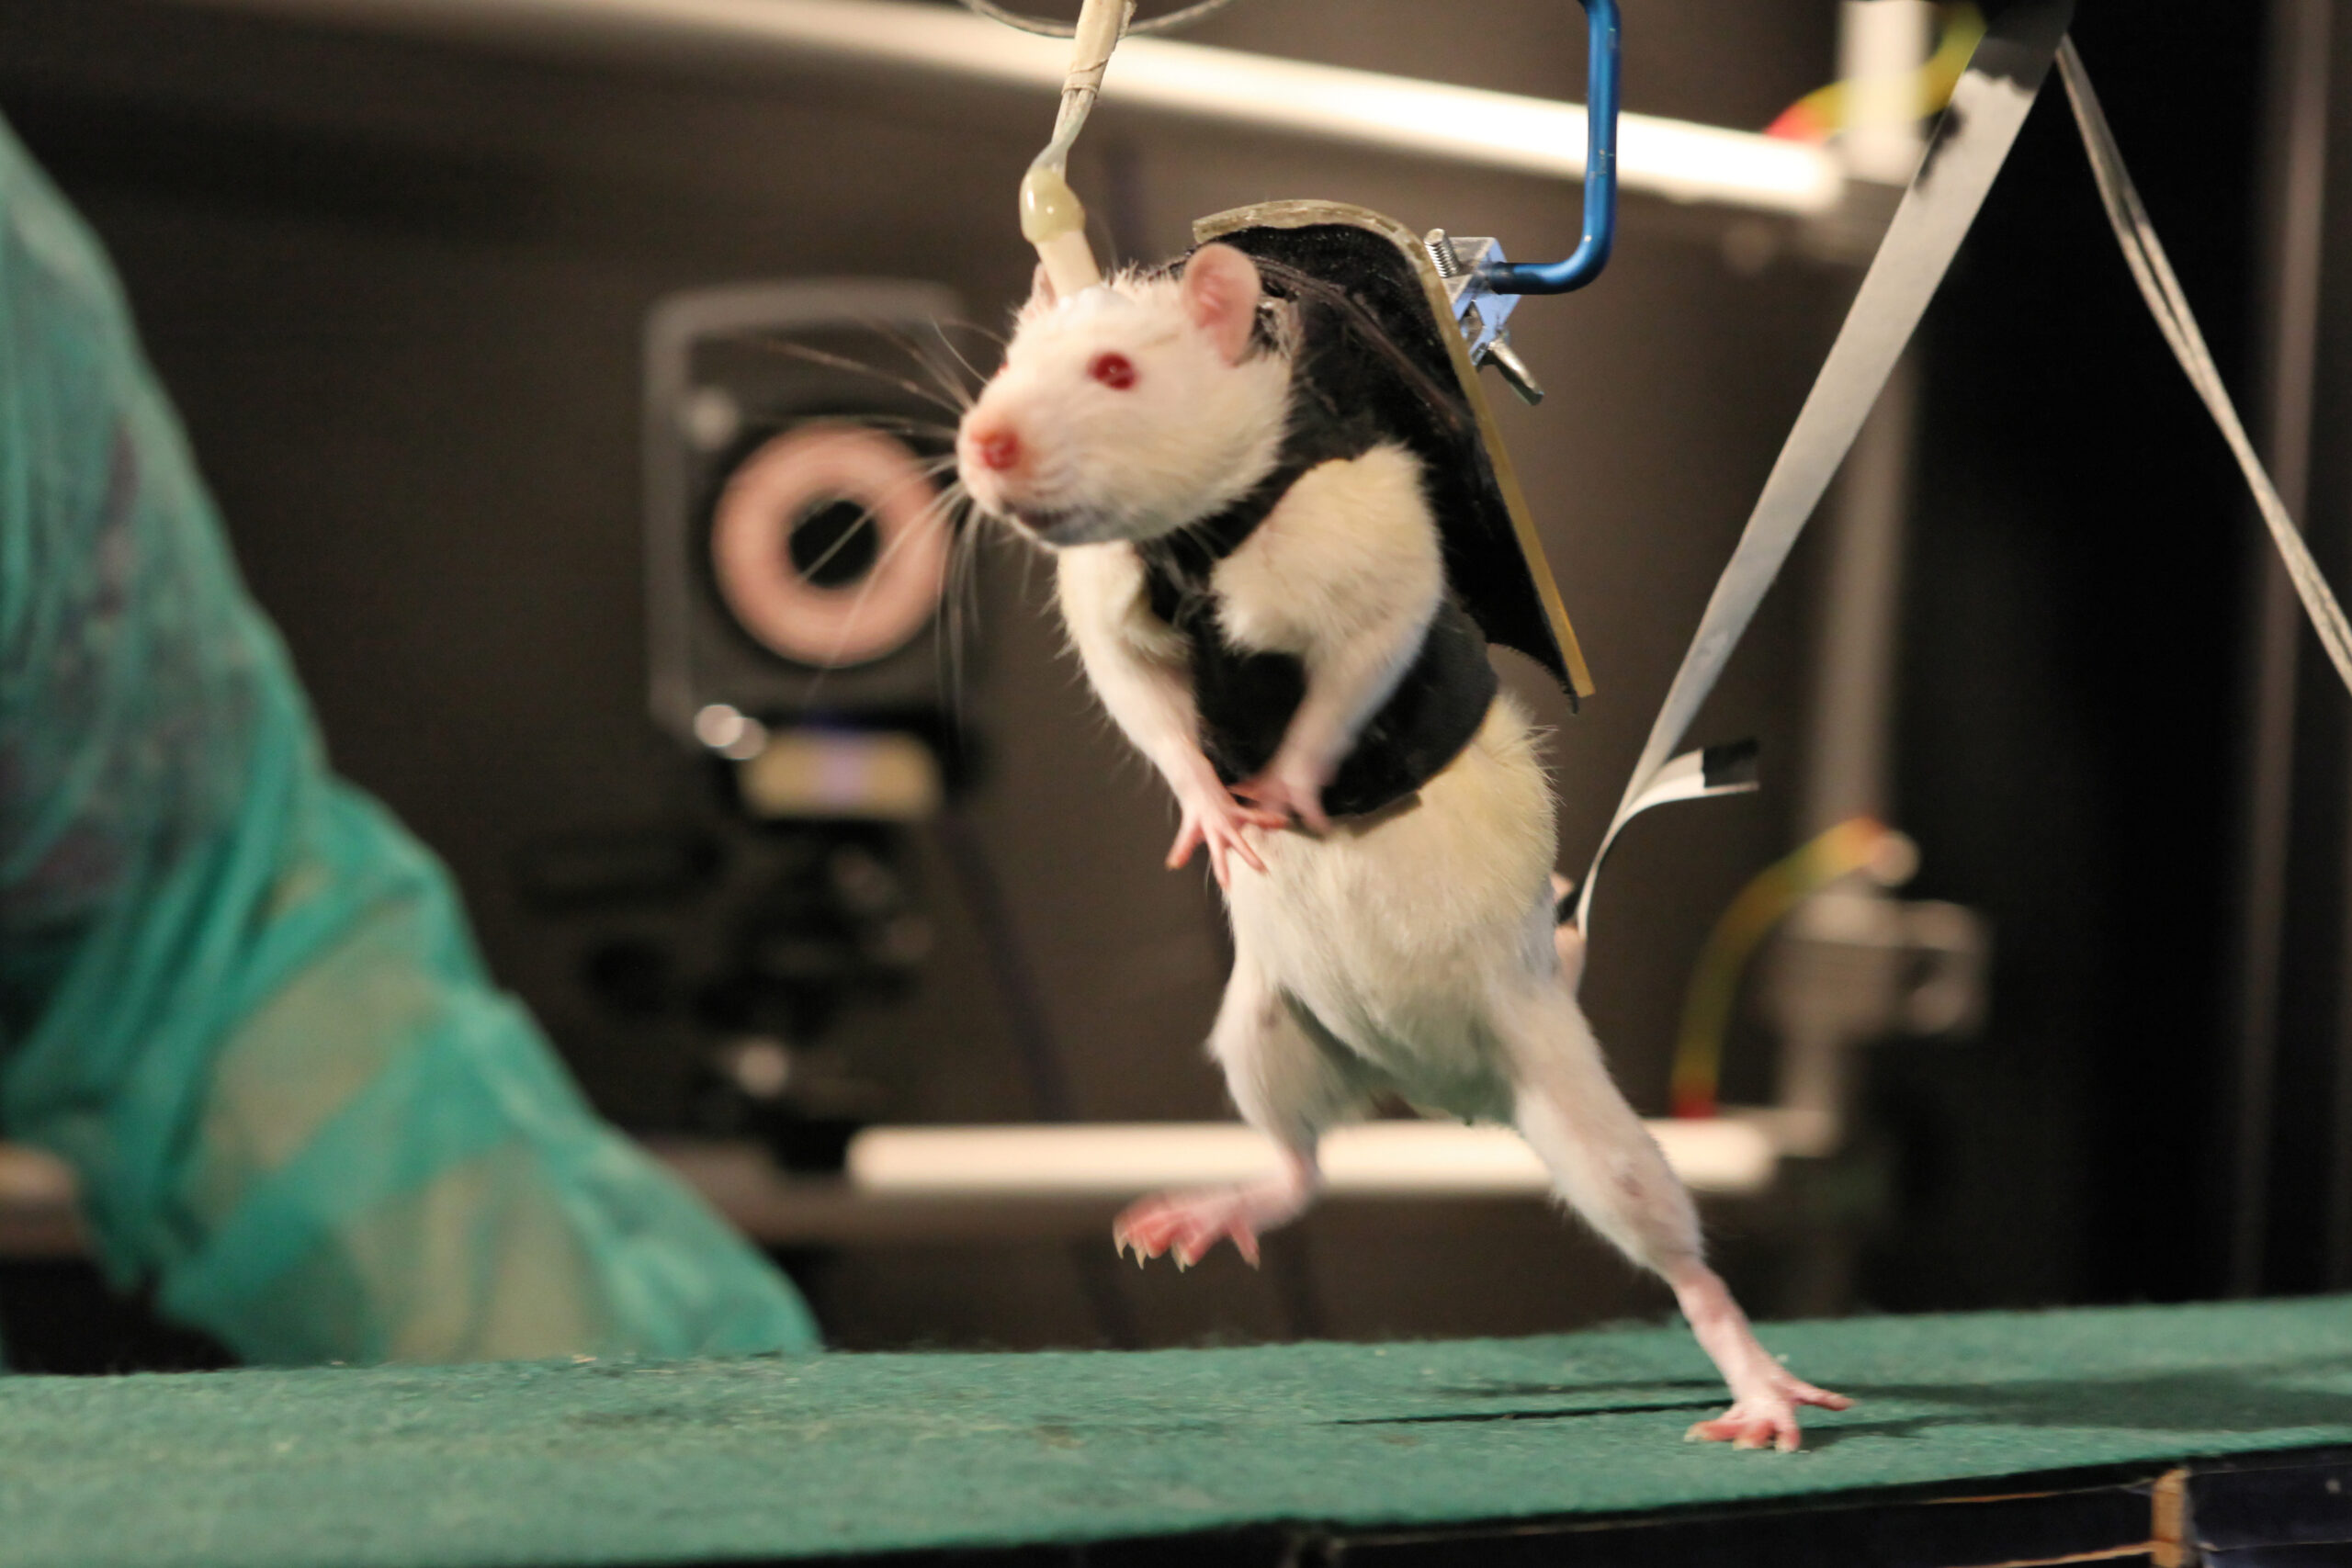 Video: After Robot-Assisted Rehab and a Dose of Chemicals, Paralyzed Rats Walk Again